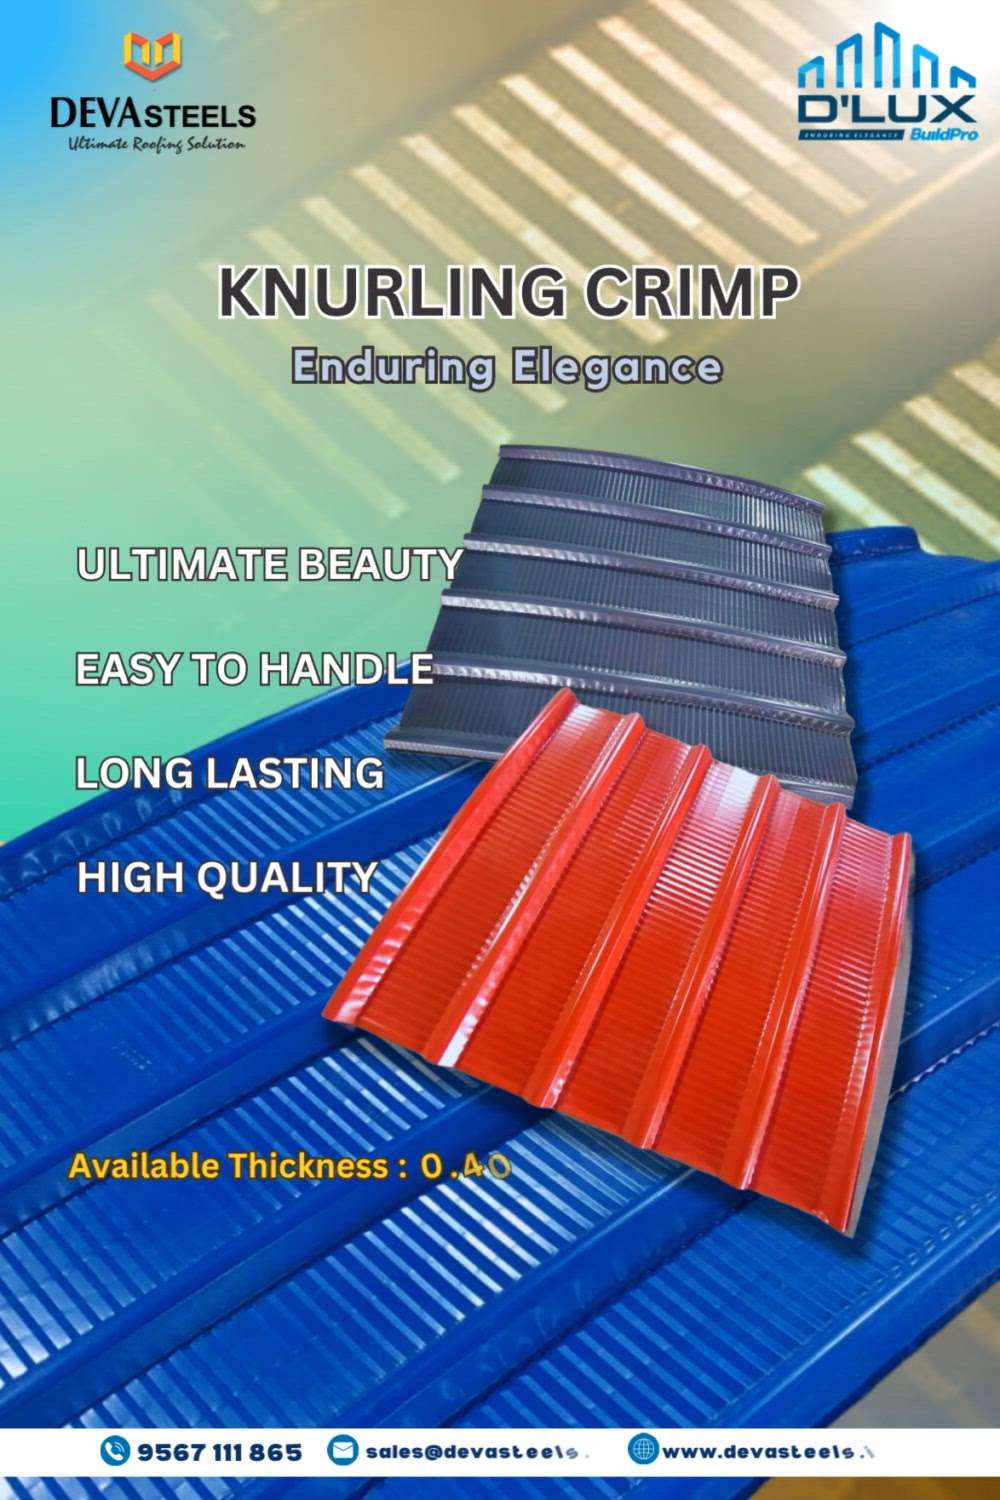 Knurling crimped / arch sheets..For the problem free arch sheet installation 

✅ Ultimate beauty
✅ Ultimate strength
✅ Ultimate quality
✅ Less chance for damage
✅ Architects choice

 #RoofingIdeas #MetalSheetRoofing #Archsheetroofing
#roofing #SteelRoofing